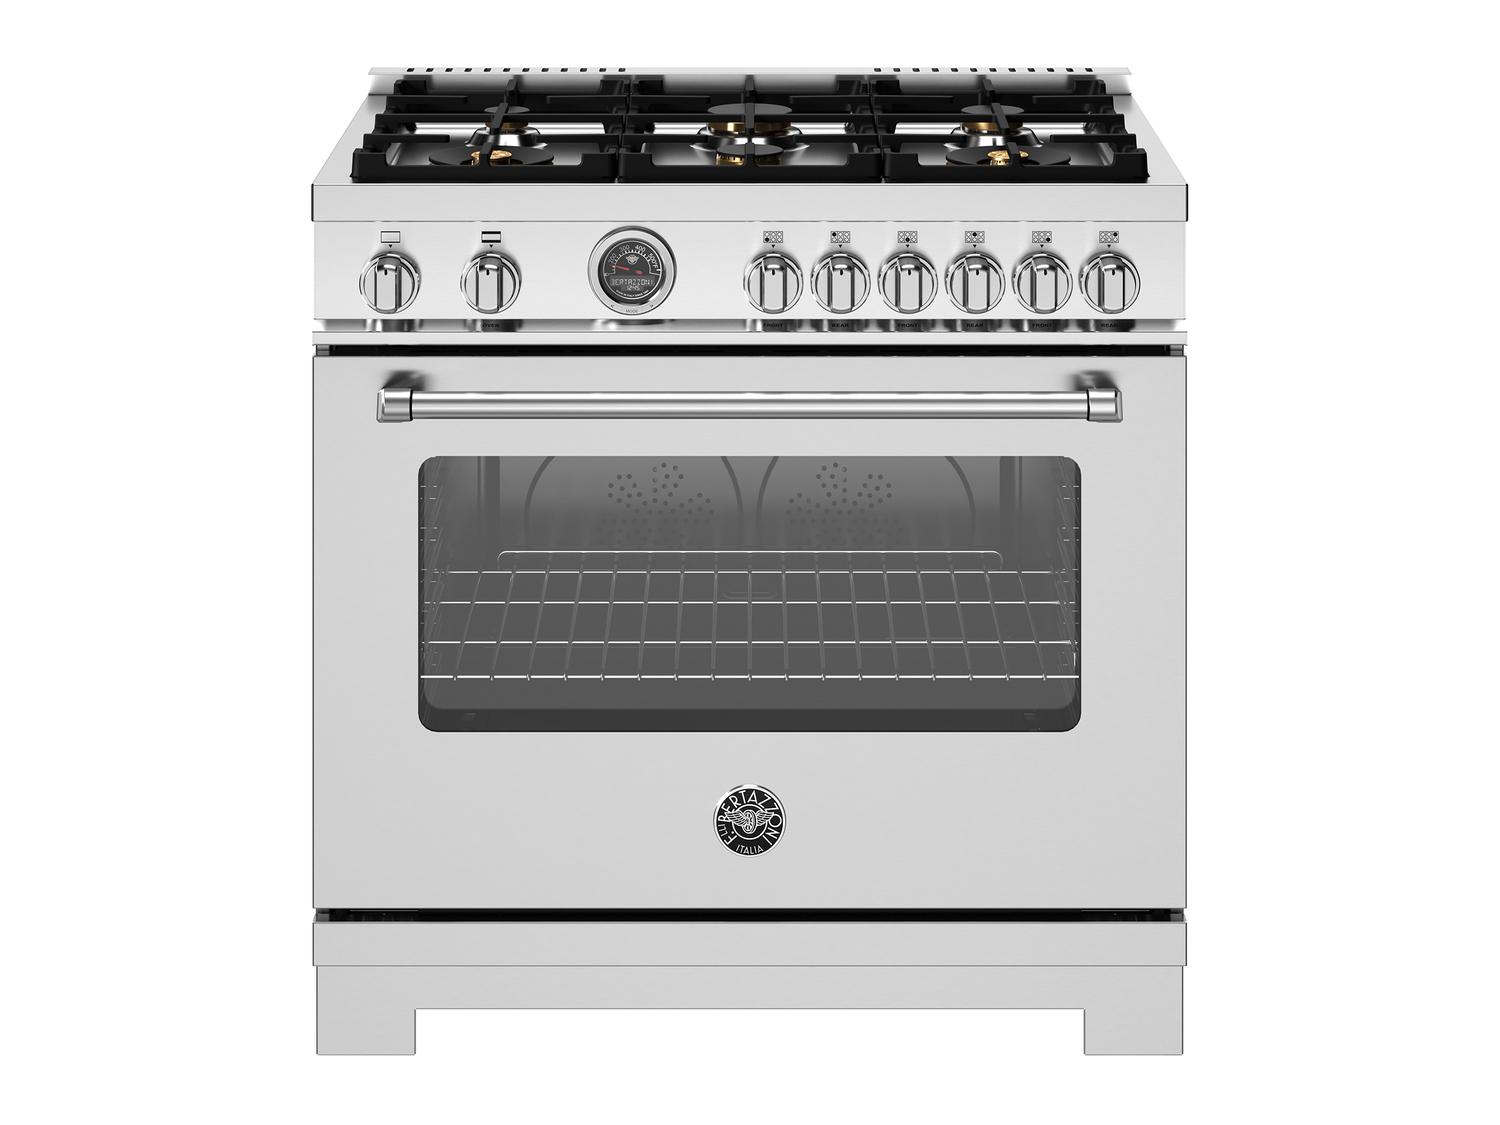 Bertazzoni MAS366BCFGMXT 36 Inch All Gas Range, 6 Brass Burners And Cast Iron Griddle Stainless Steel